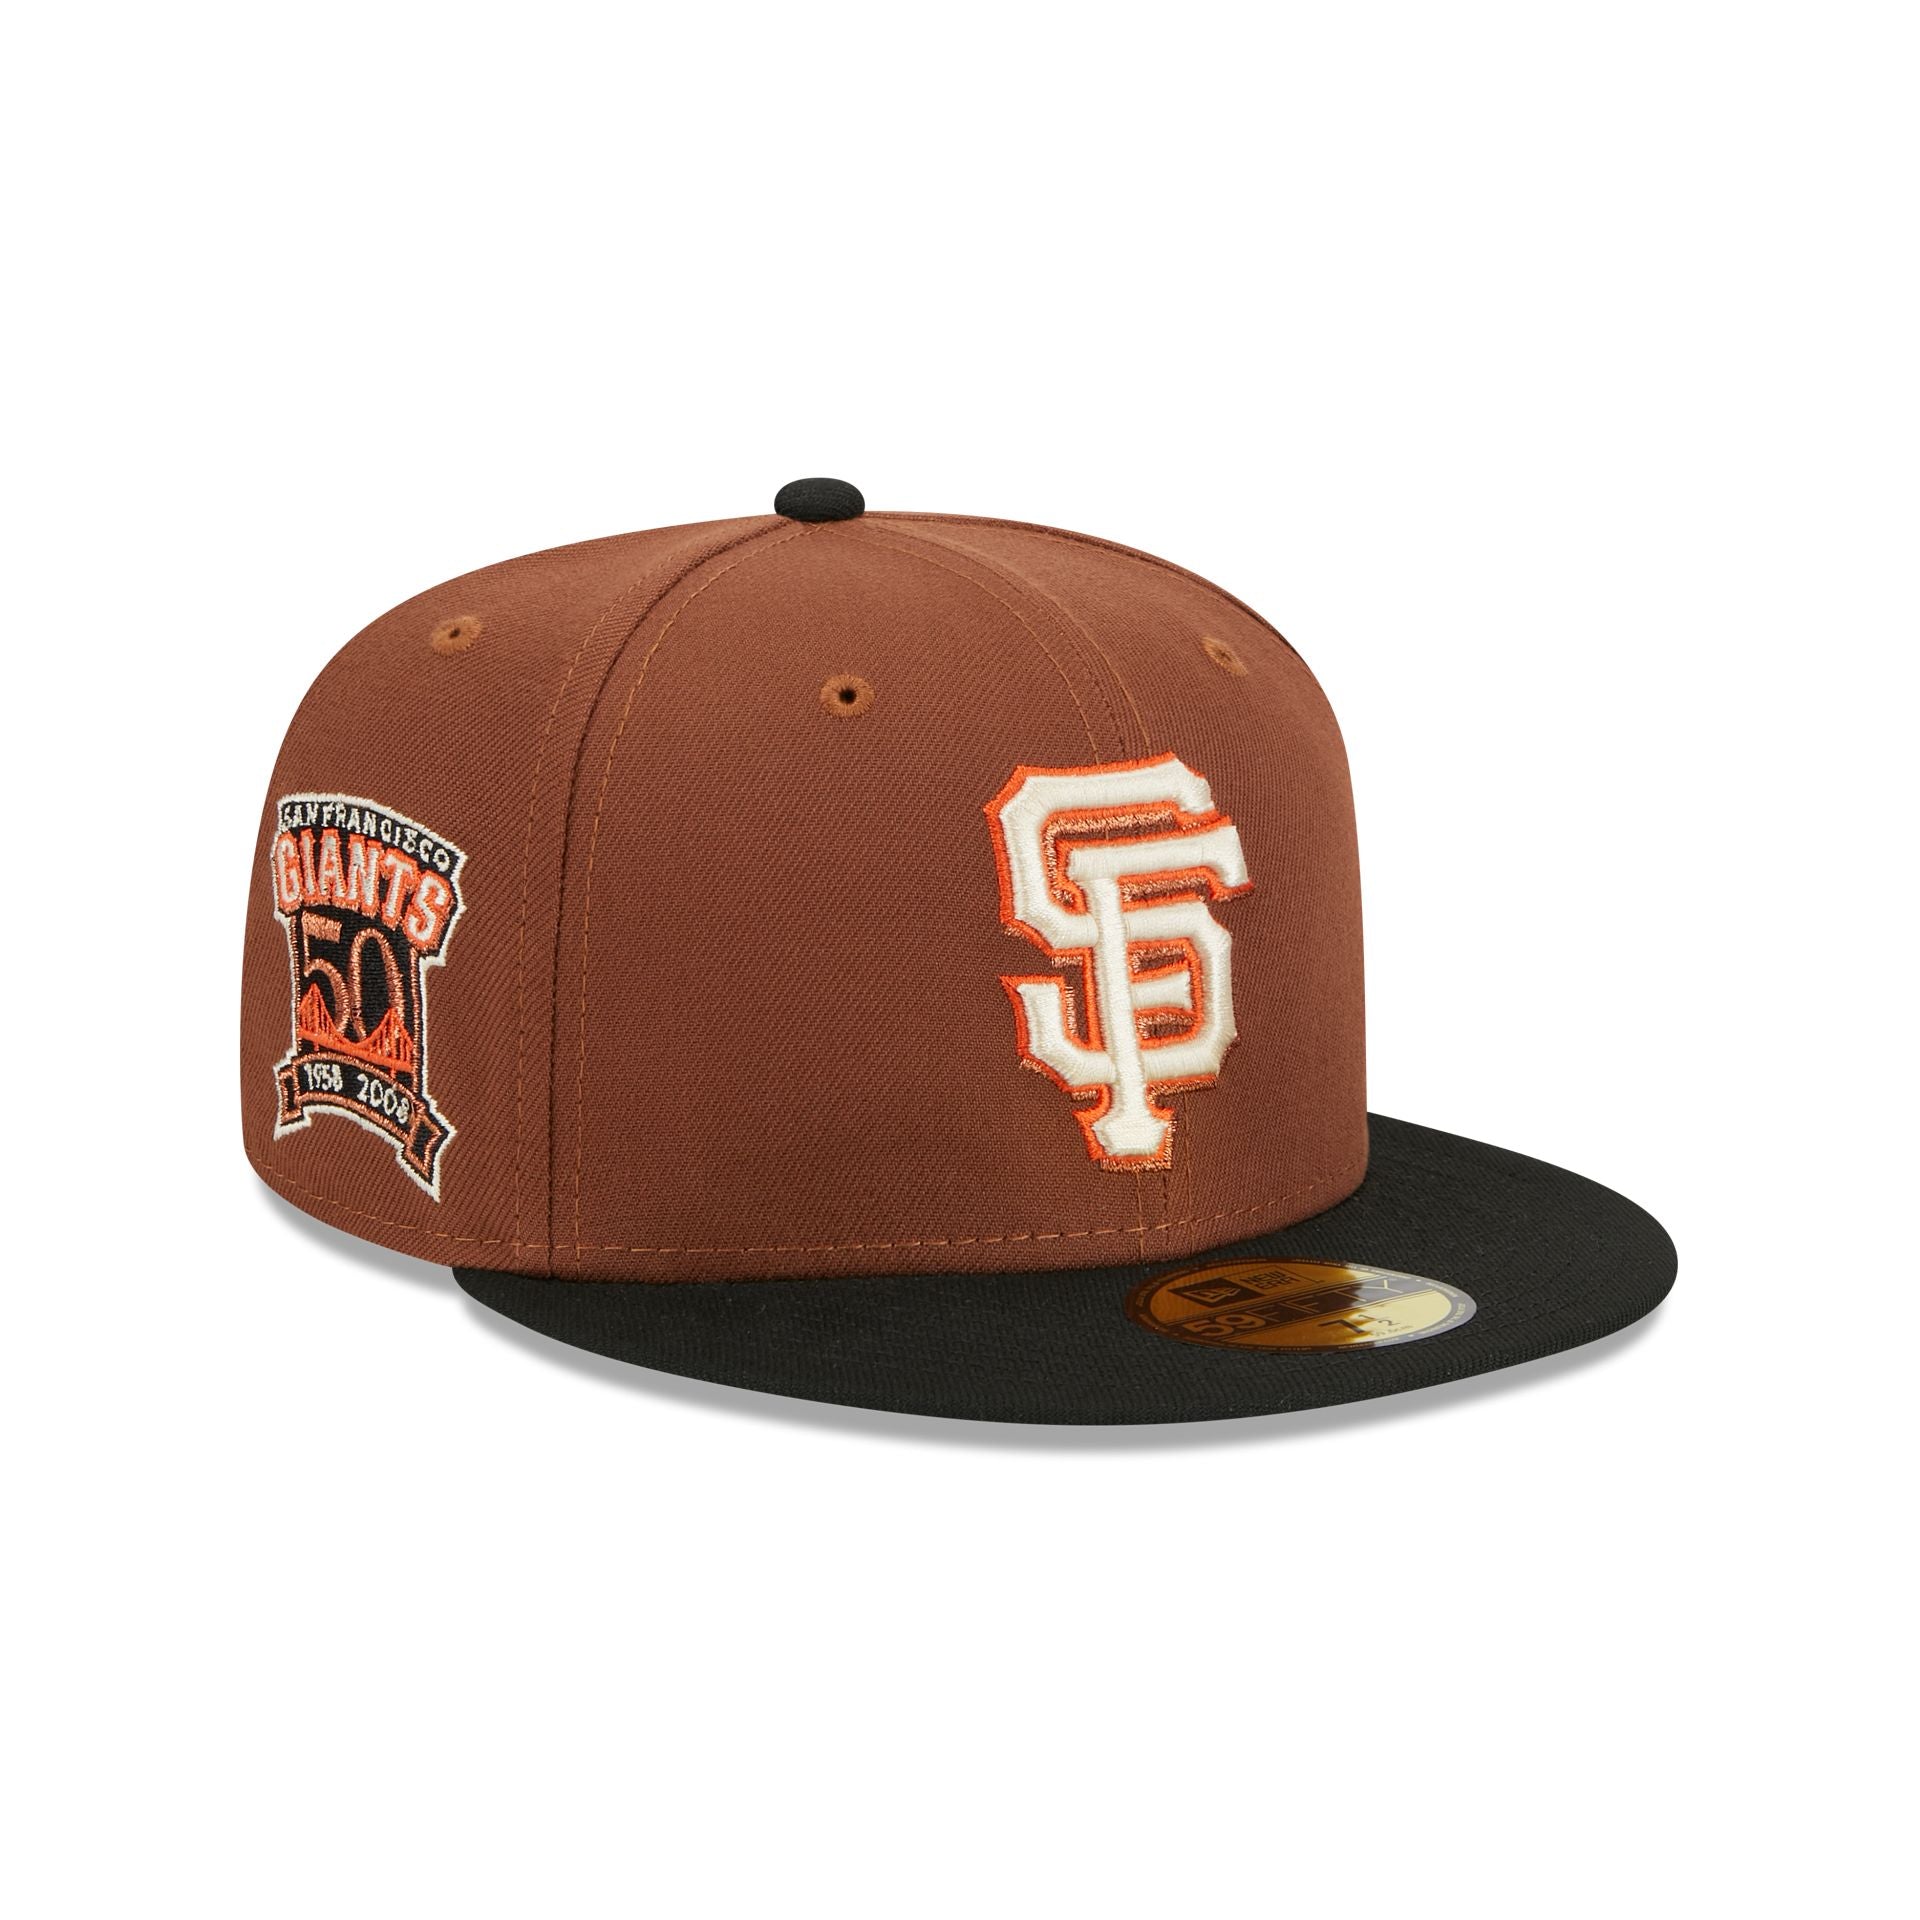 New Era Caps San Francisco Giants Harvest 59FIFTY Fitted Hat Brown